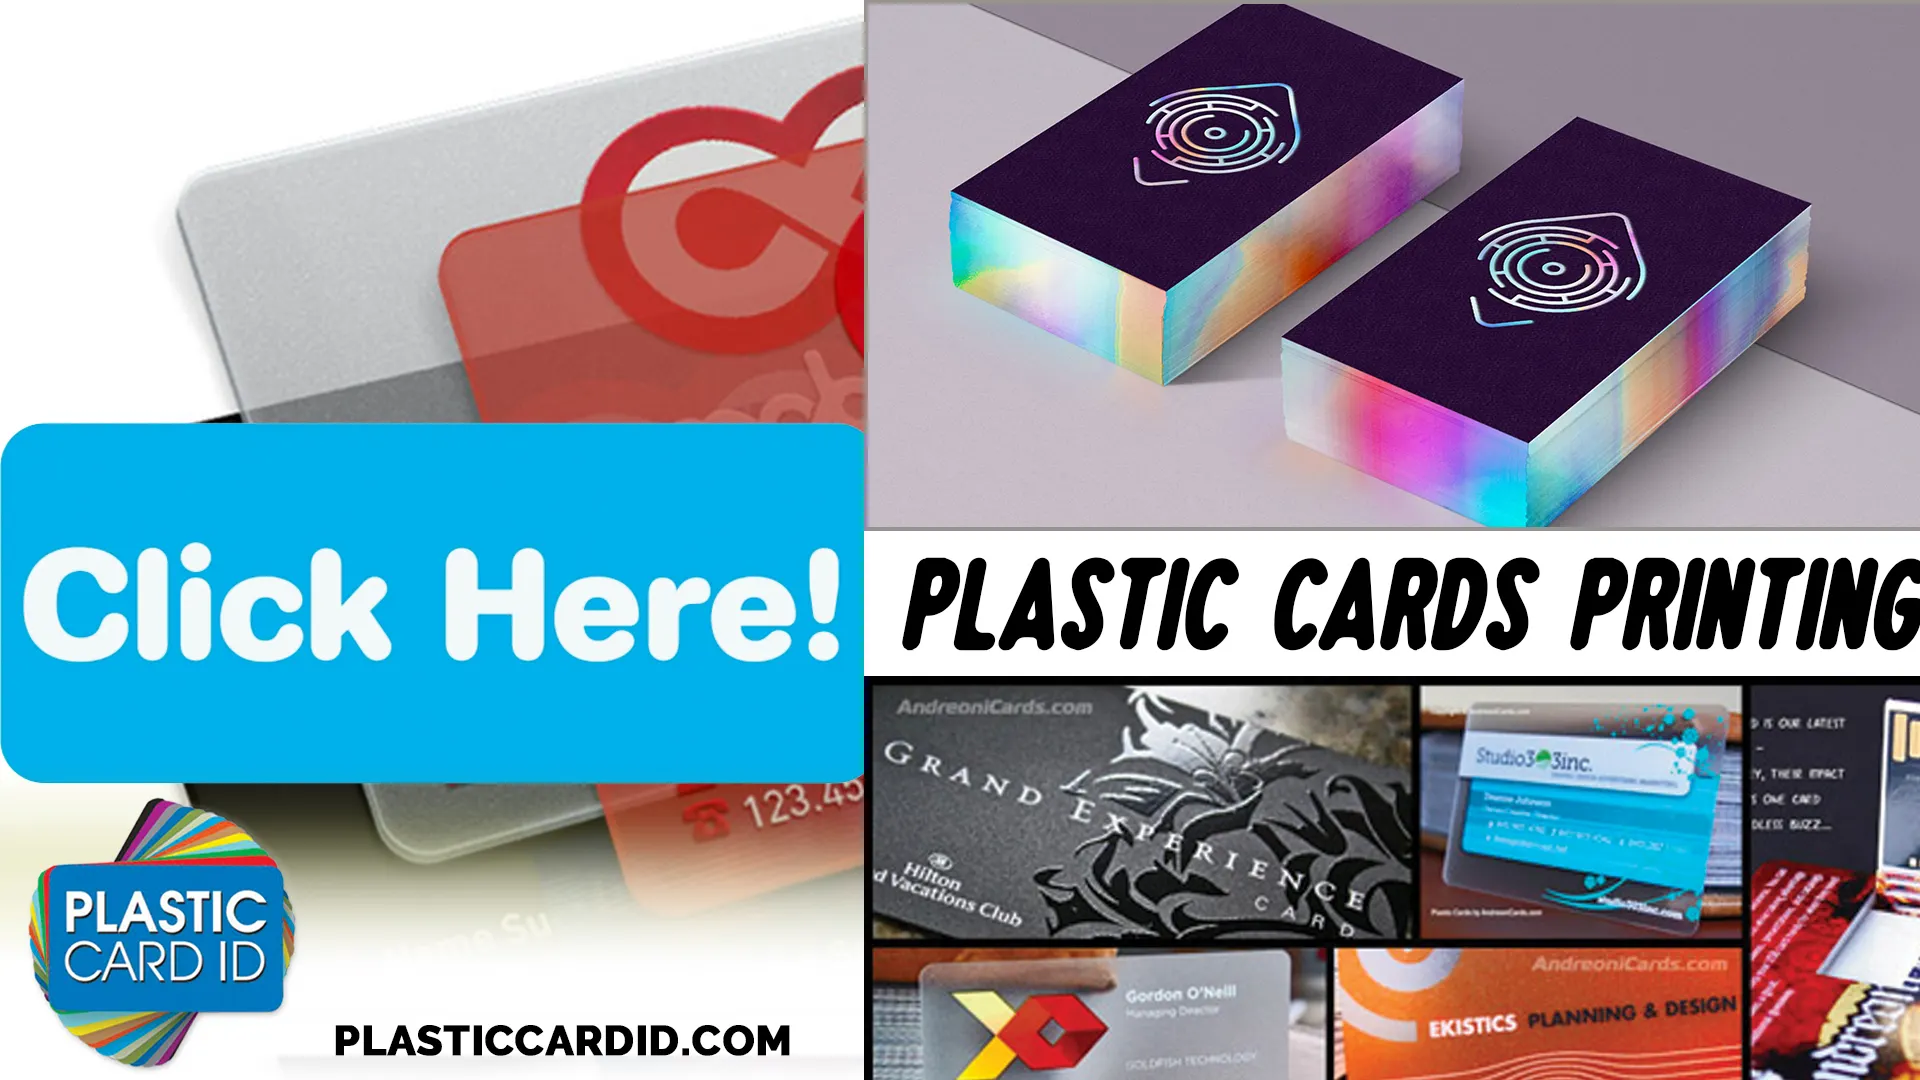 Welcome to a New Era of Brand Engagement with Plastic Cards